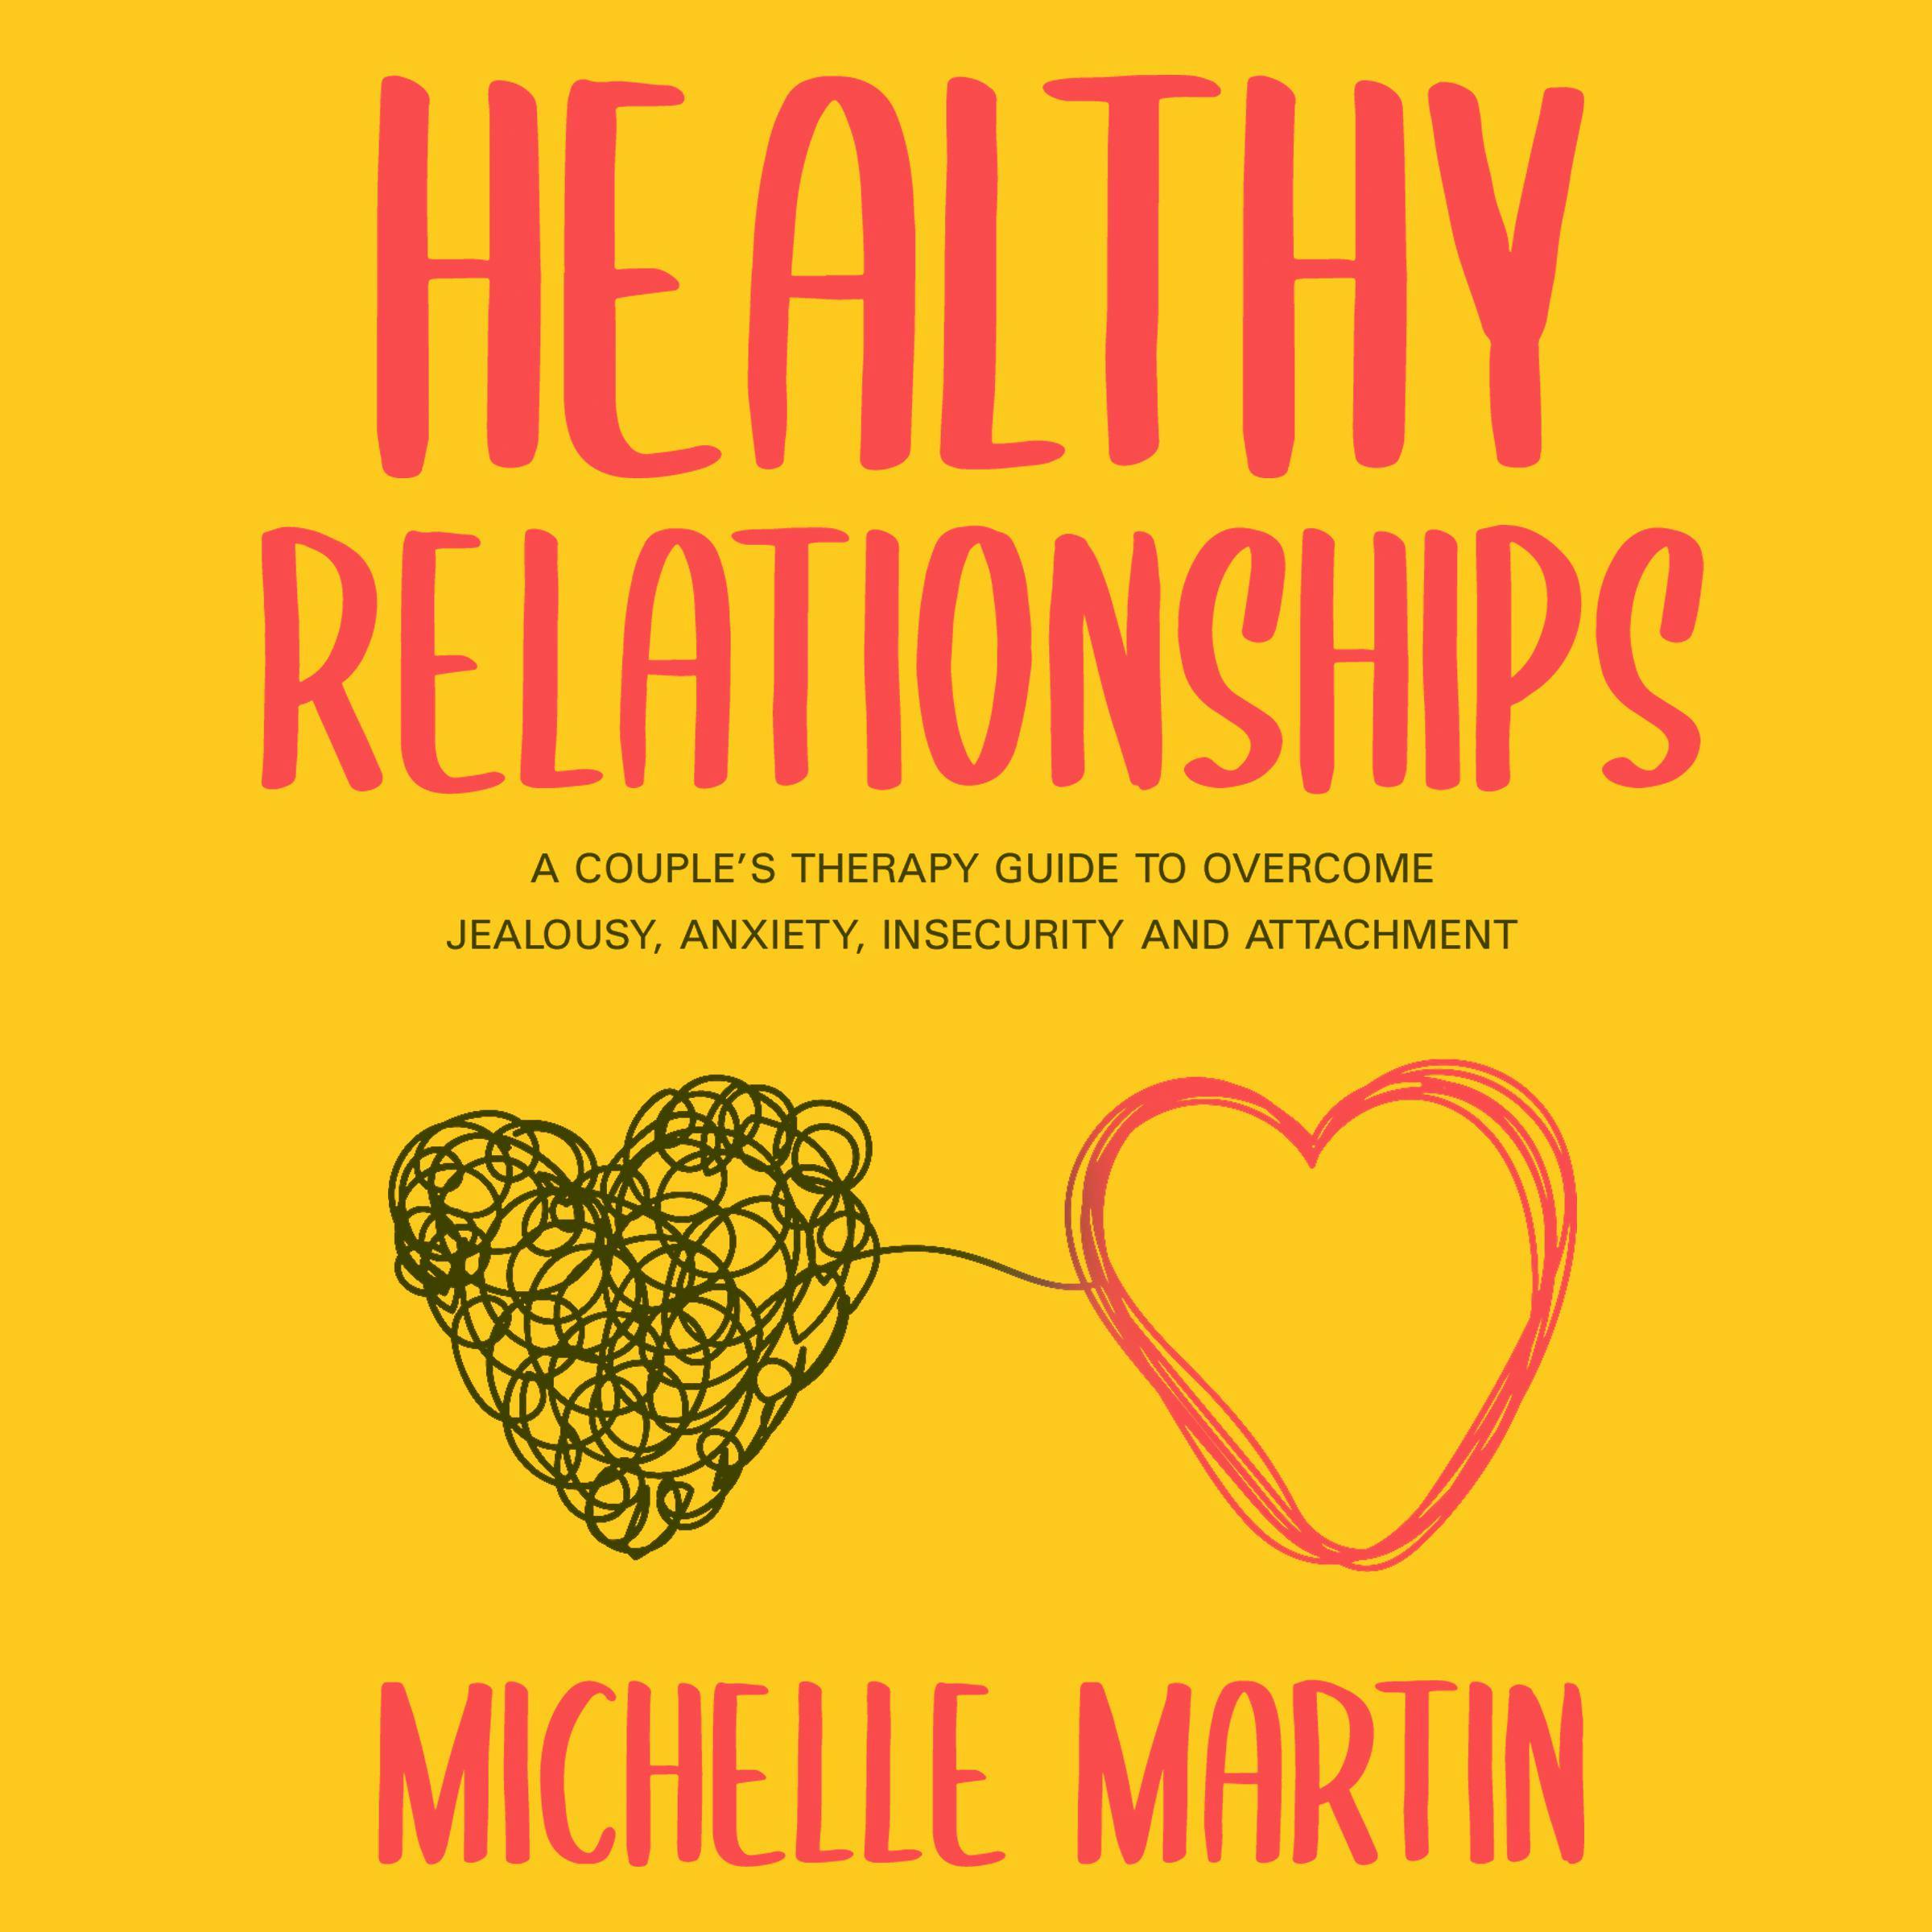 Healthy Relationships: A Couple’s Therapy Guide to Overcome Jealousy, Anxiety, Insecurity and Attachment - Michelle Martin